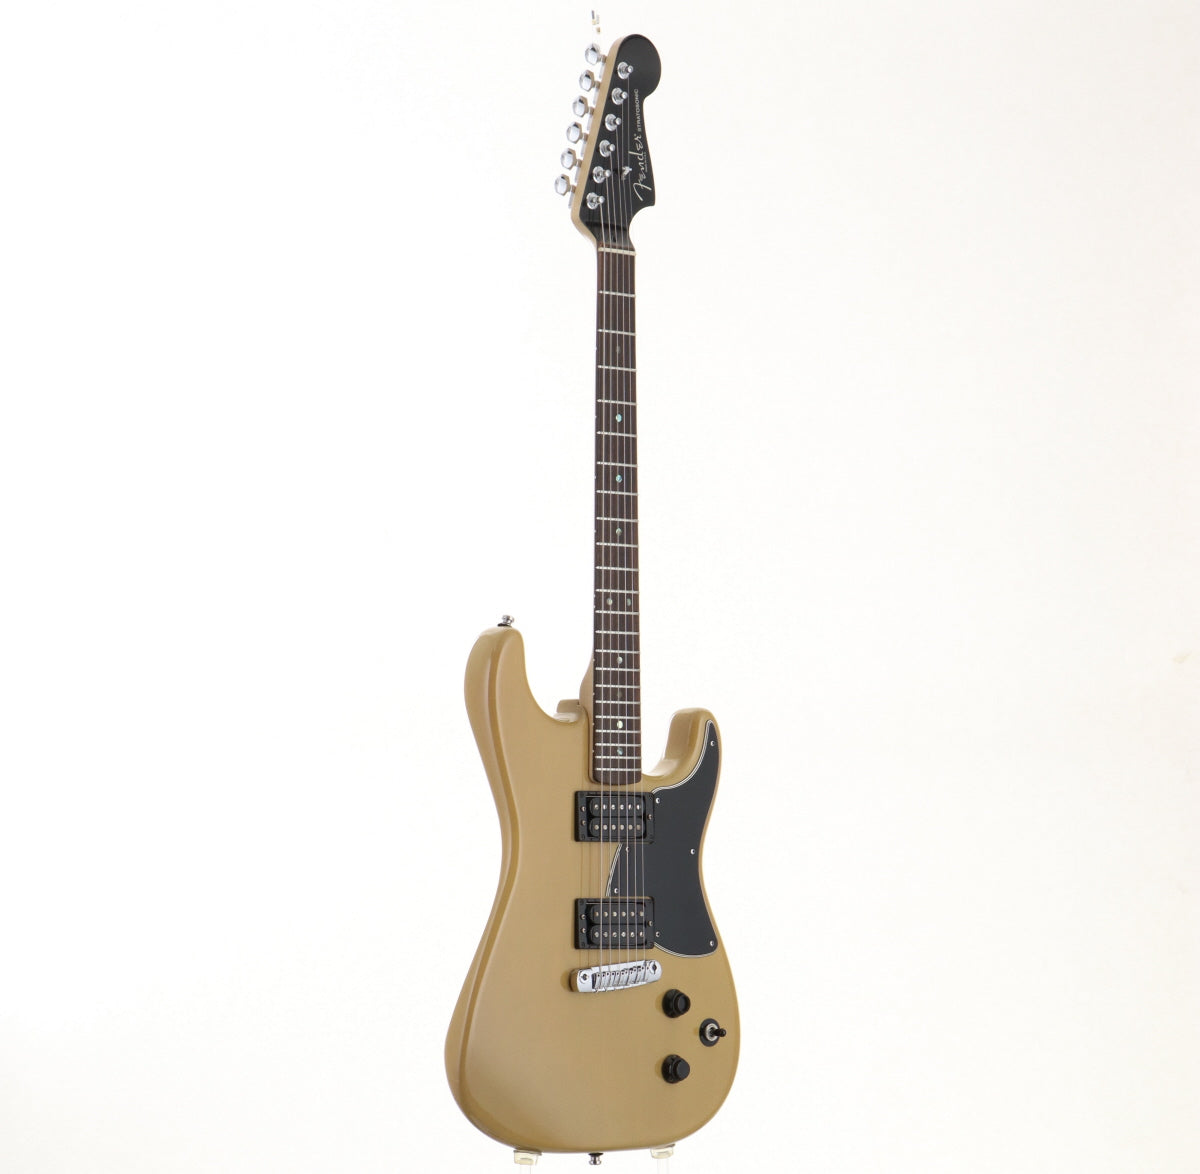 [SN DZ5157294] USED Fender USA / American Special Strat-O-Sonic HH Butterscotch Blonde [10]